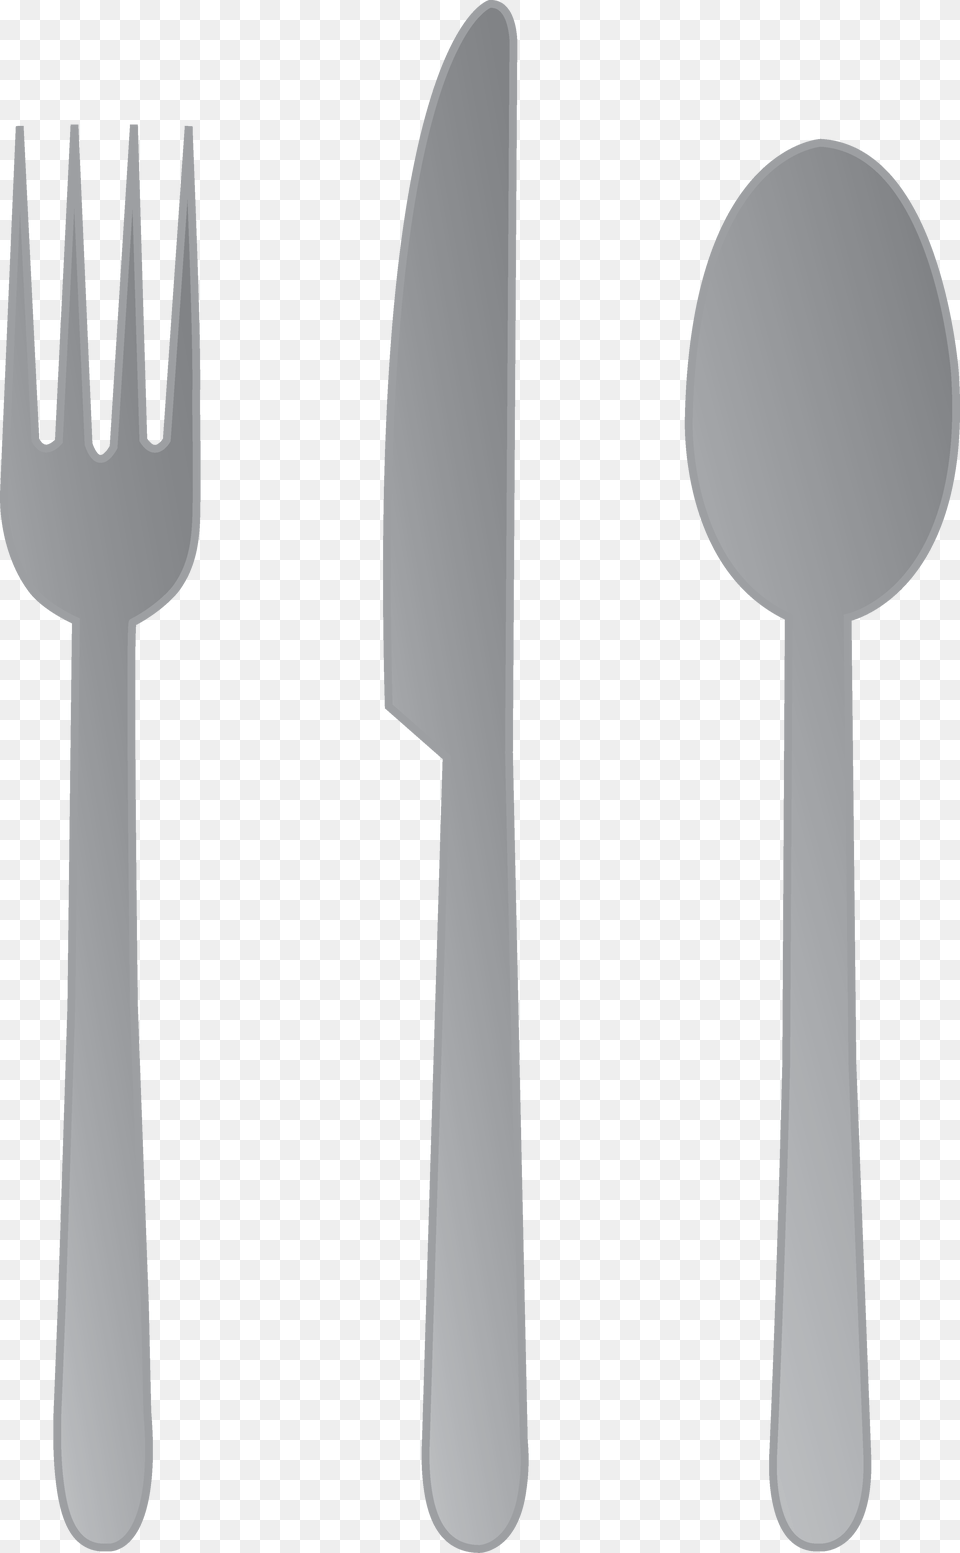 Library Of Spoon Fork Knife Jpg Clip Art Spoon And Fork, Cutlery, Blade, Dagger, Weapon Png Image